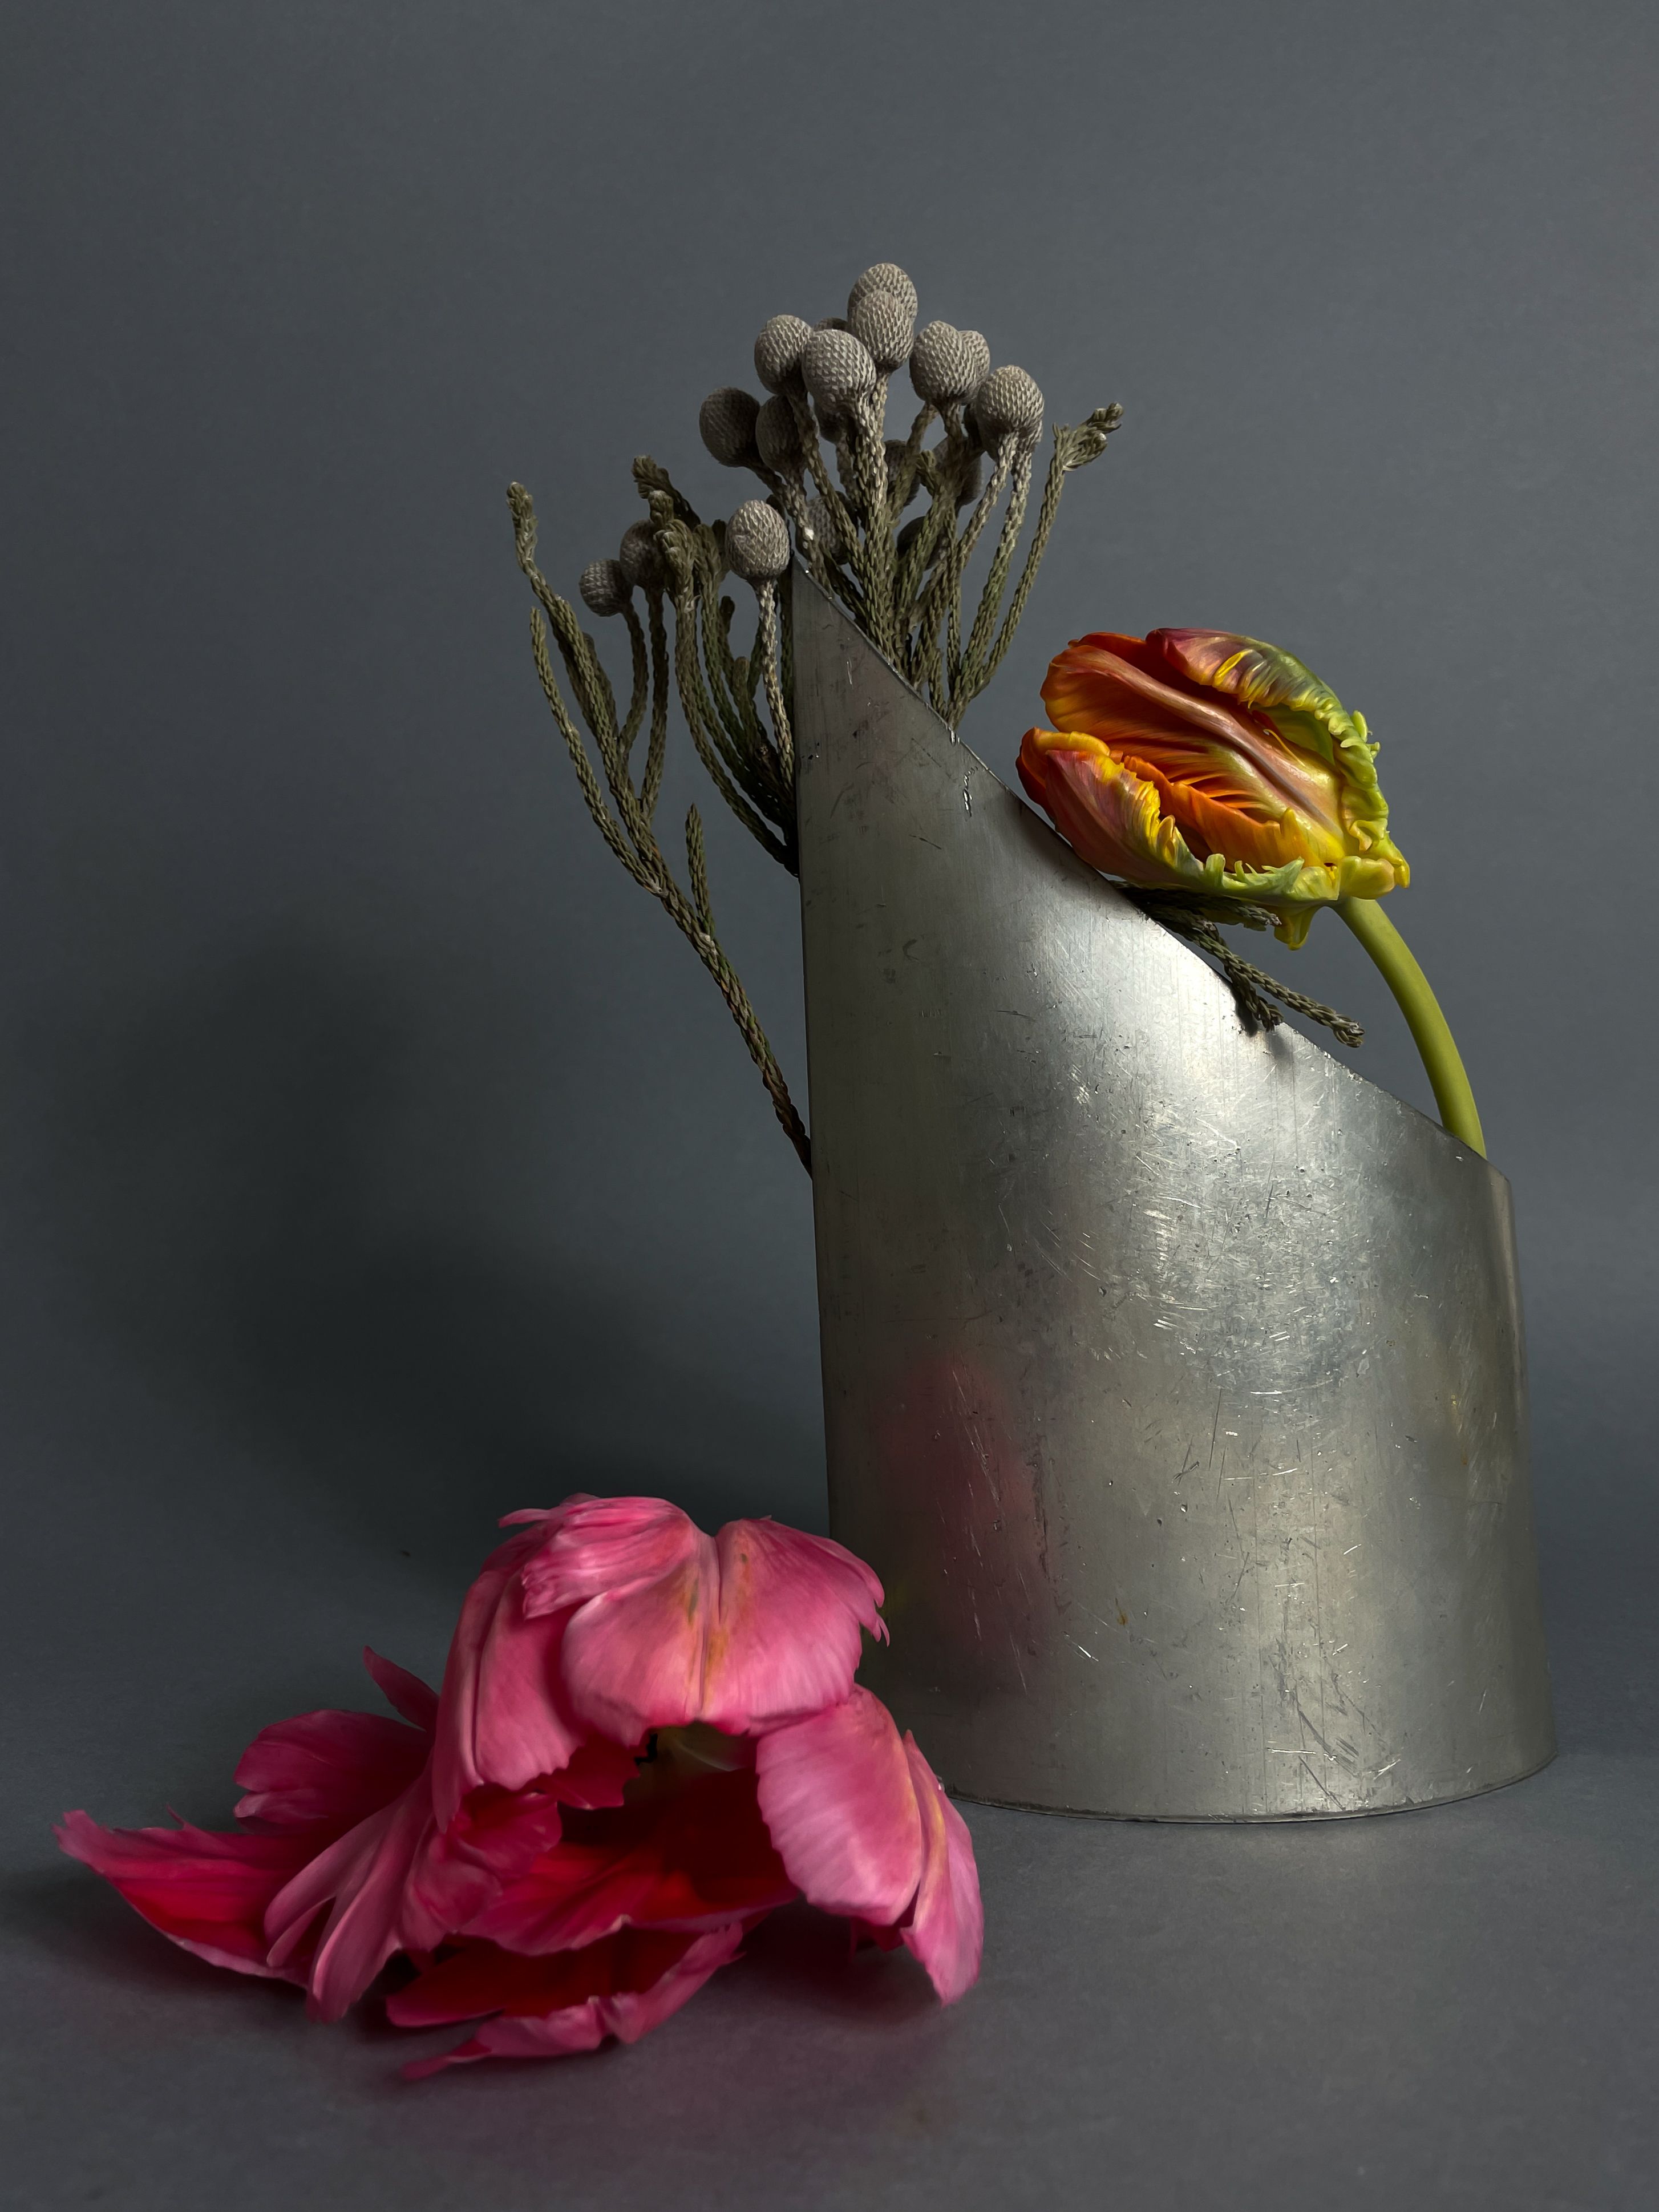 Silver sculpture element arranged with parrot tulips and a mediterranean dryflower